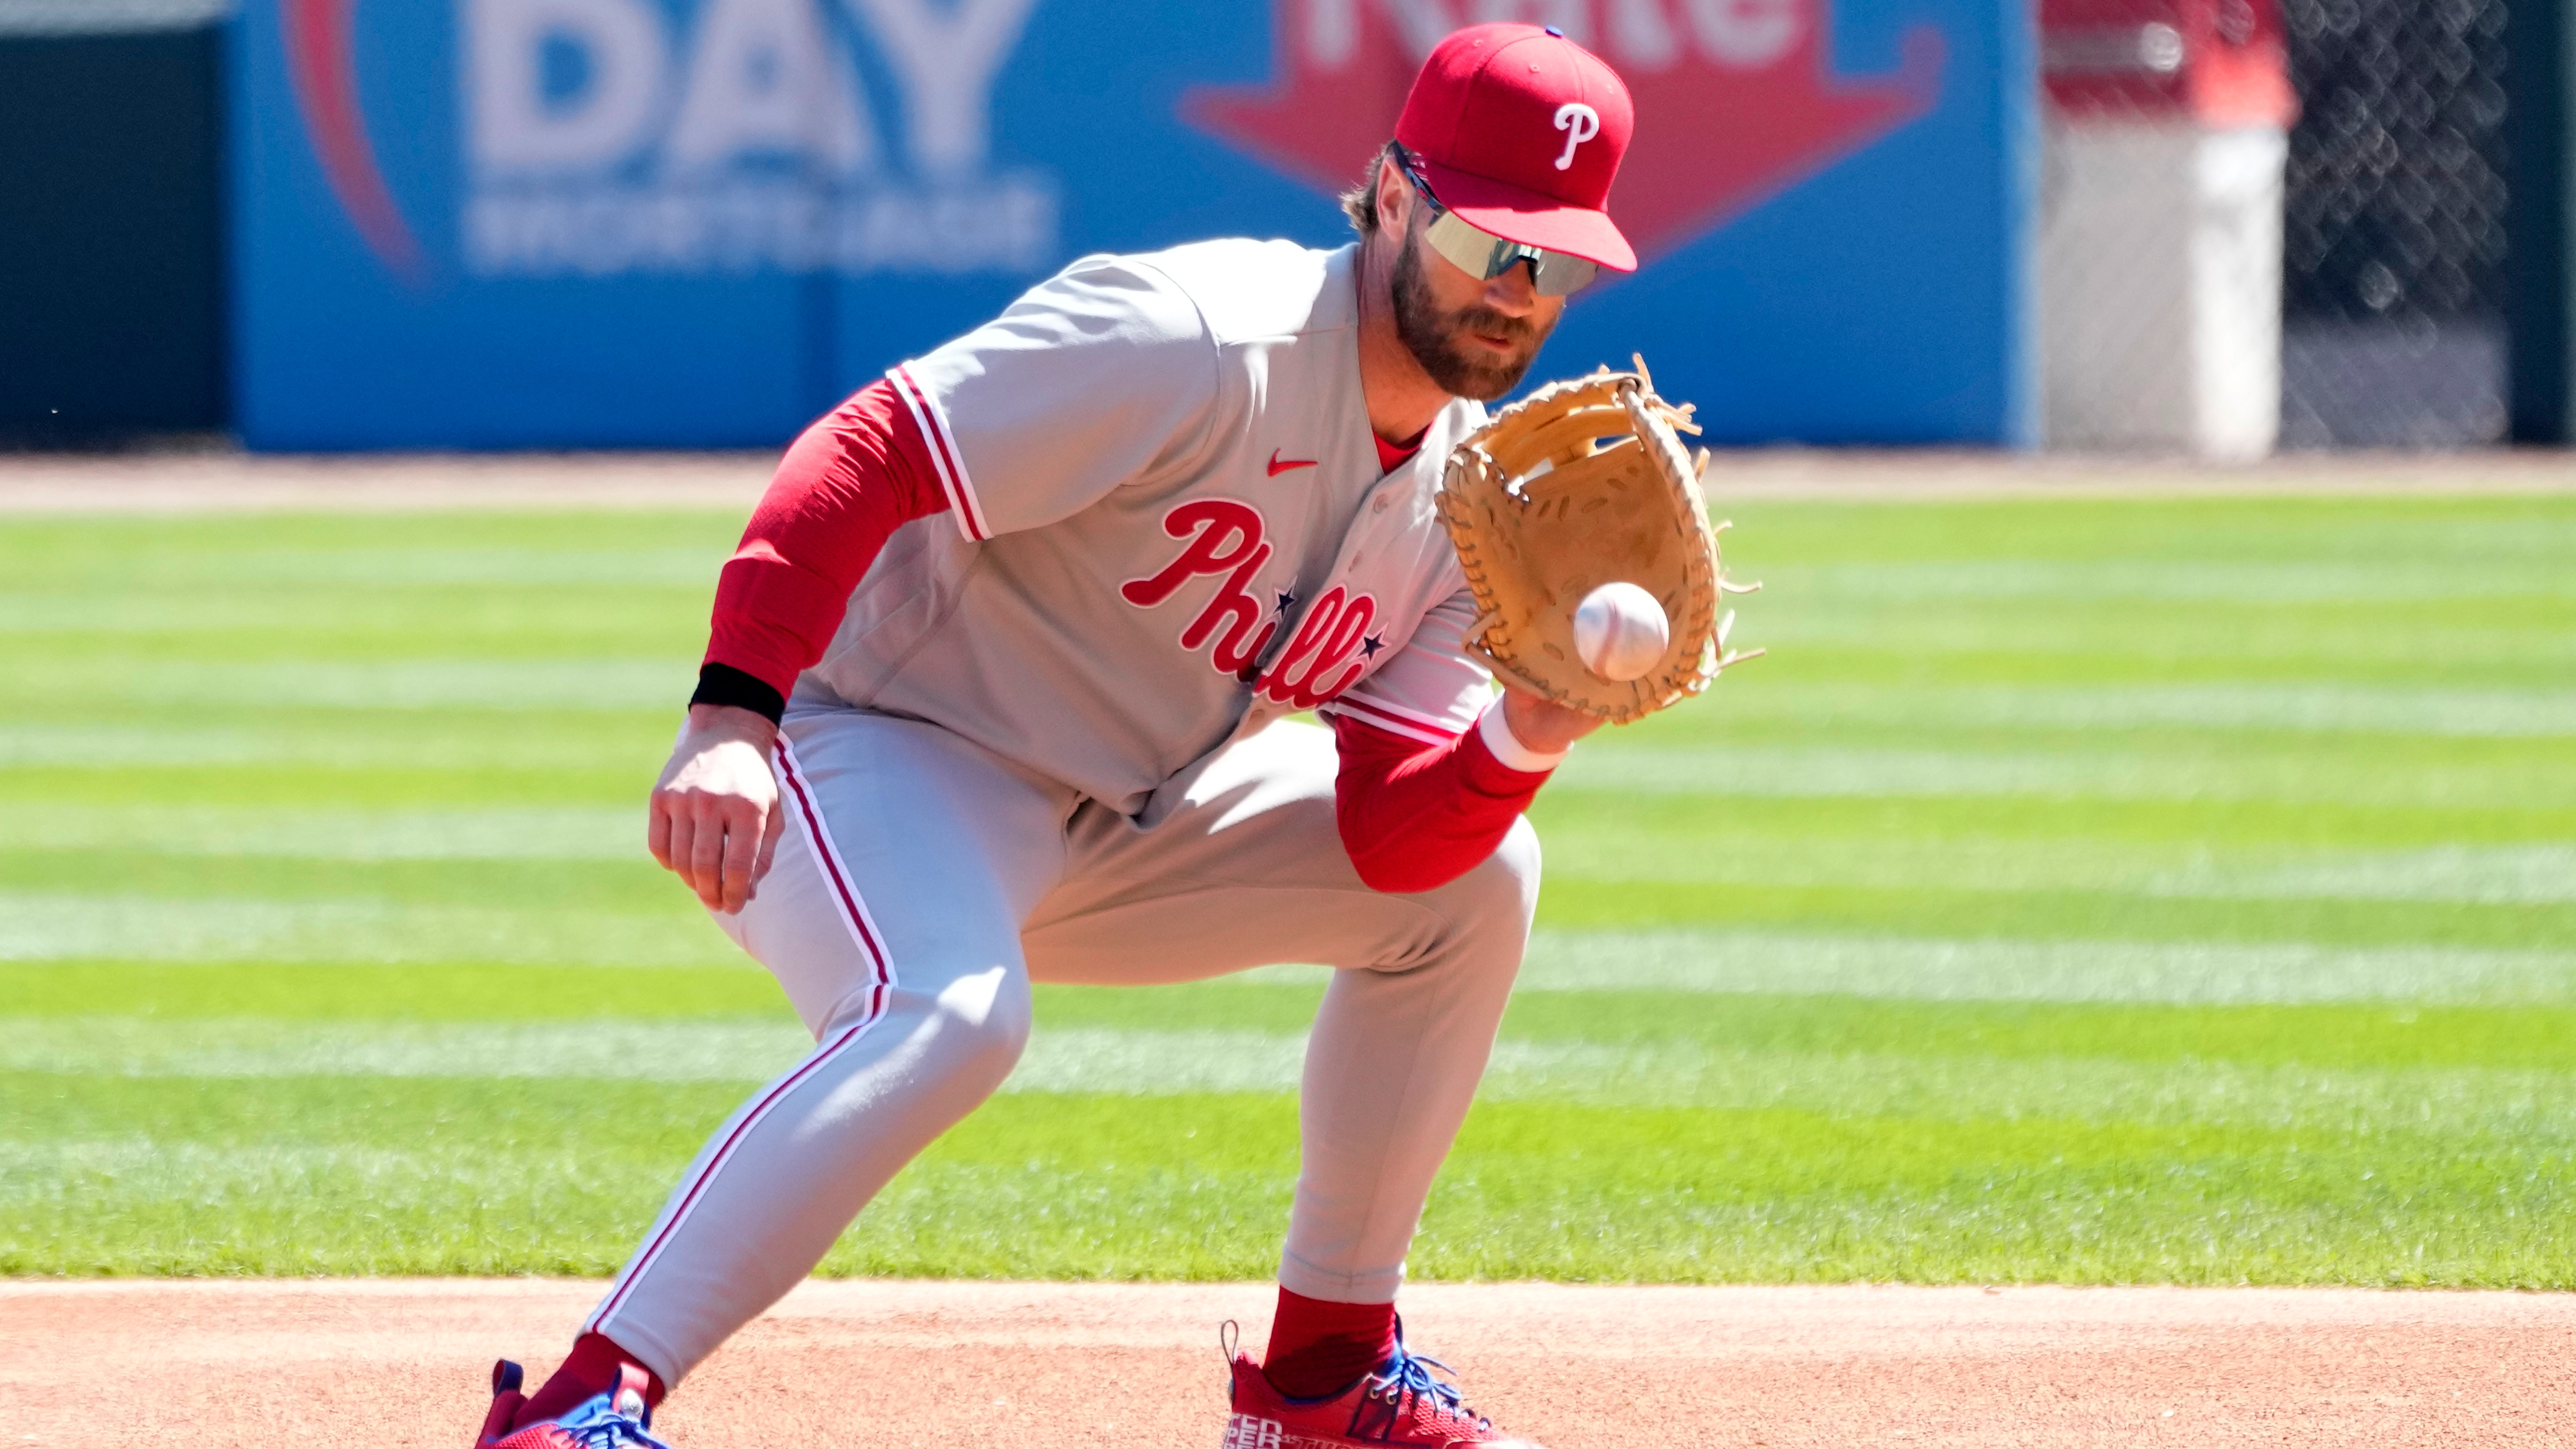 In the midst of another odd season, Phillies' Bryce Harper is